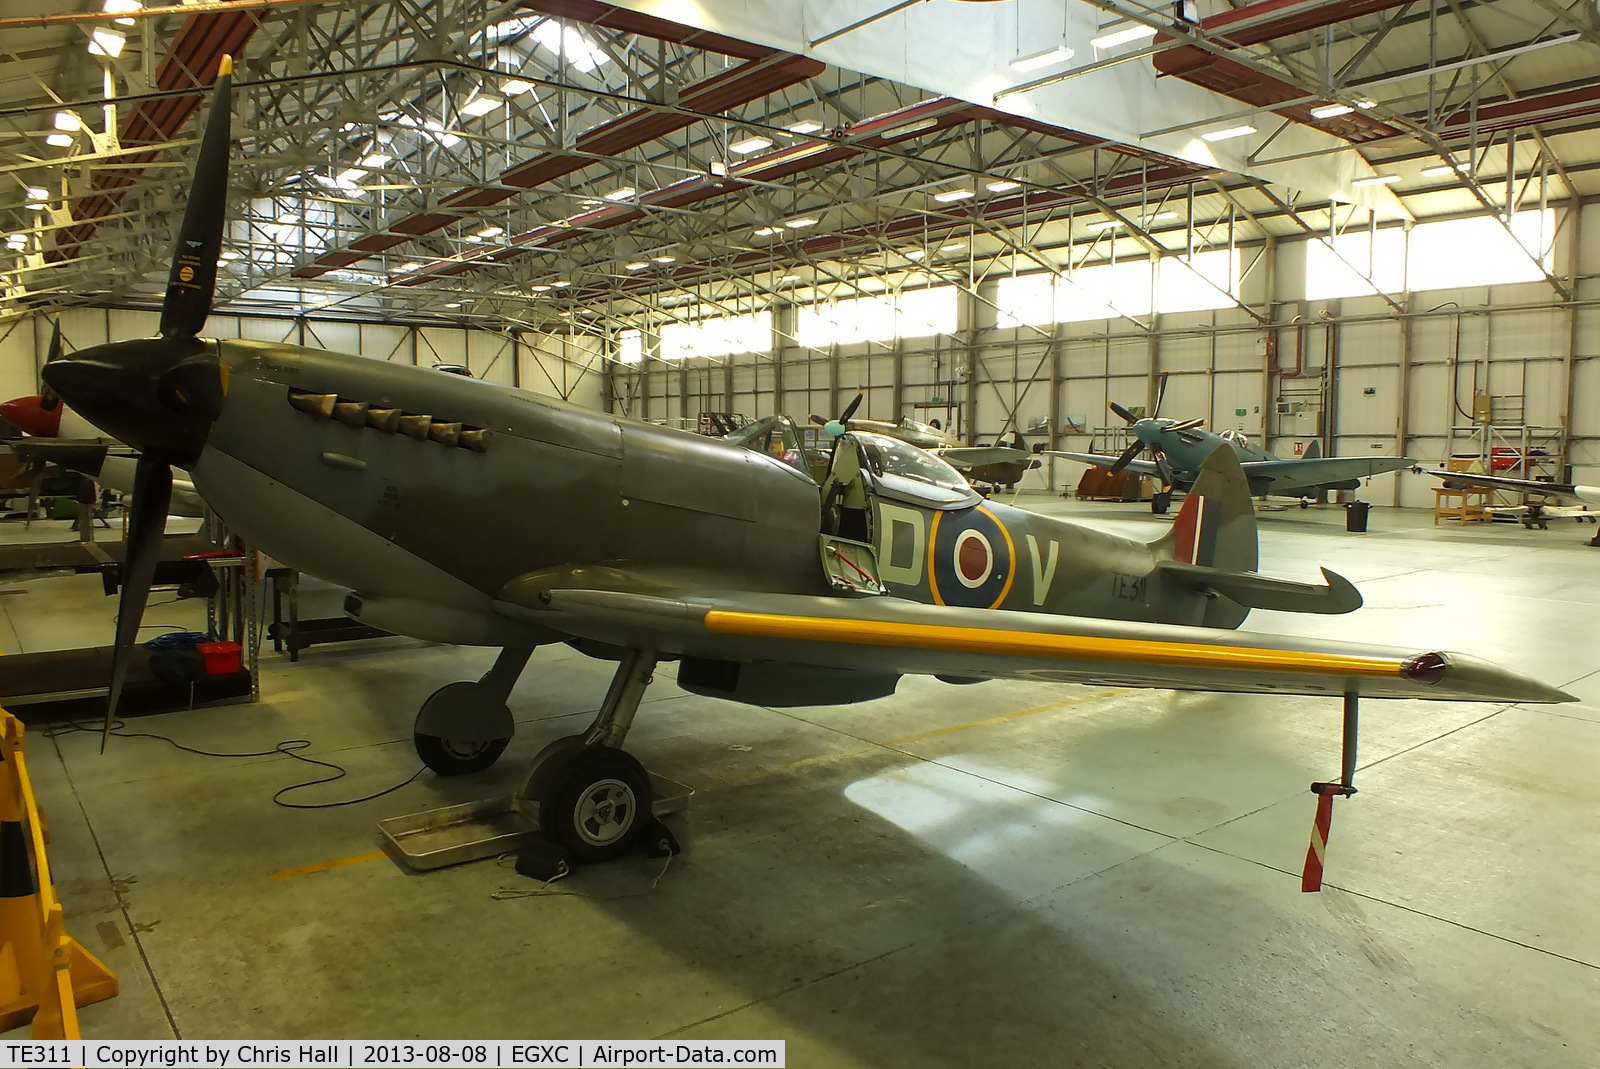 TE311, 1945 Supermarine 361 Spitfire LF.XVIe C/N CBAF.IX.4497, The latest Spitfire to be added to the BBMF fleet, former ‘gate guard’ at Tangmere for 12 years, re-built to flying condition by BBMF technicians between 2001 and 2013. painted to represent Spitfire XVI TB675 ‘4D-V’ of No 74 Sqn